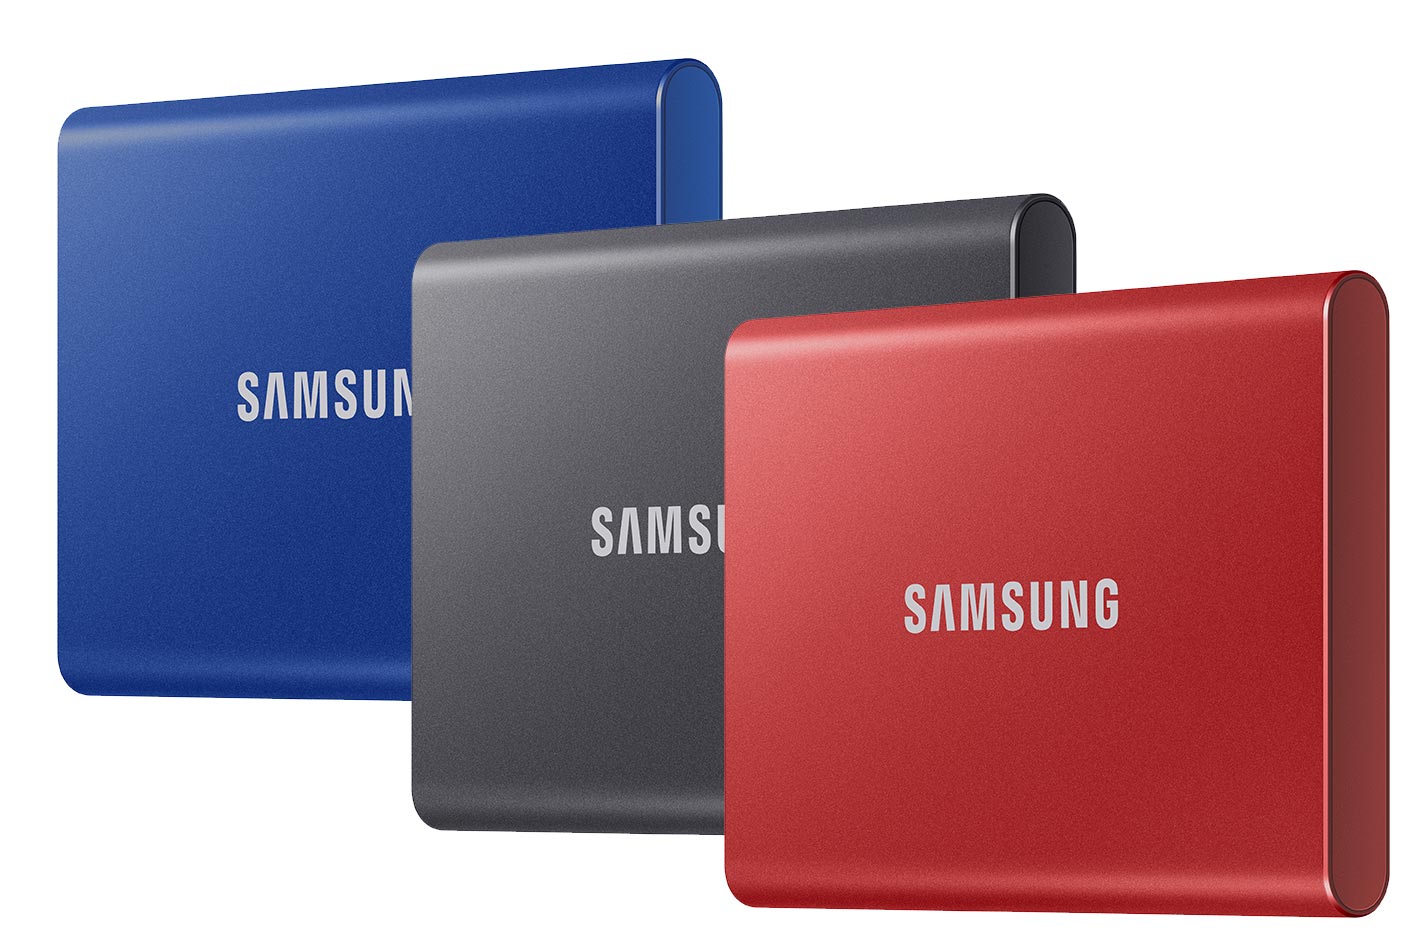 Samsung Portable T7 SSD: fast mobile storage now available